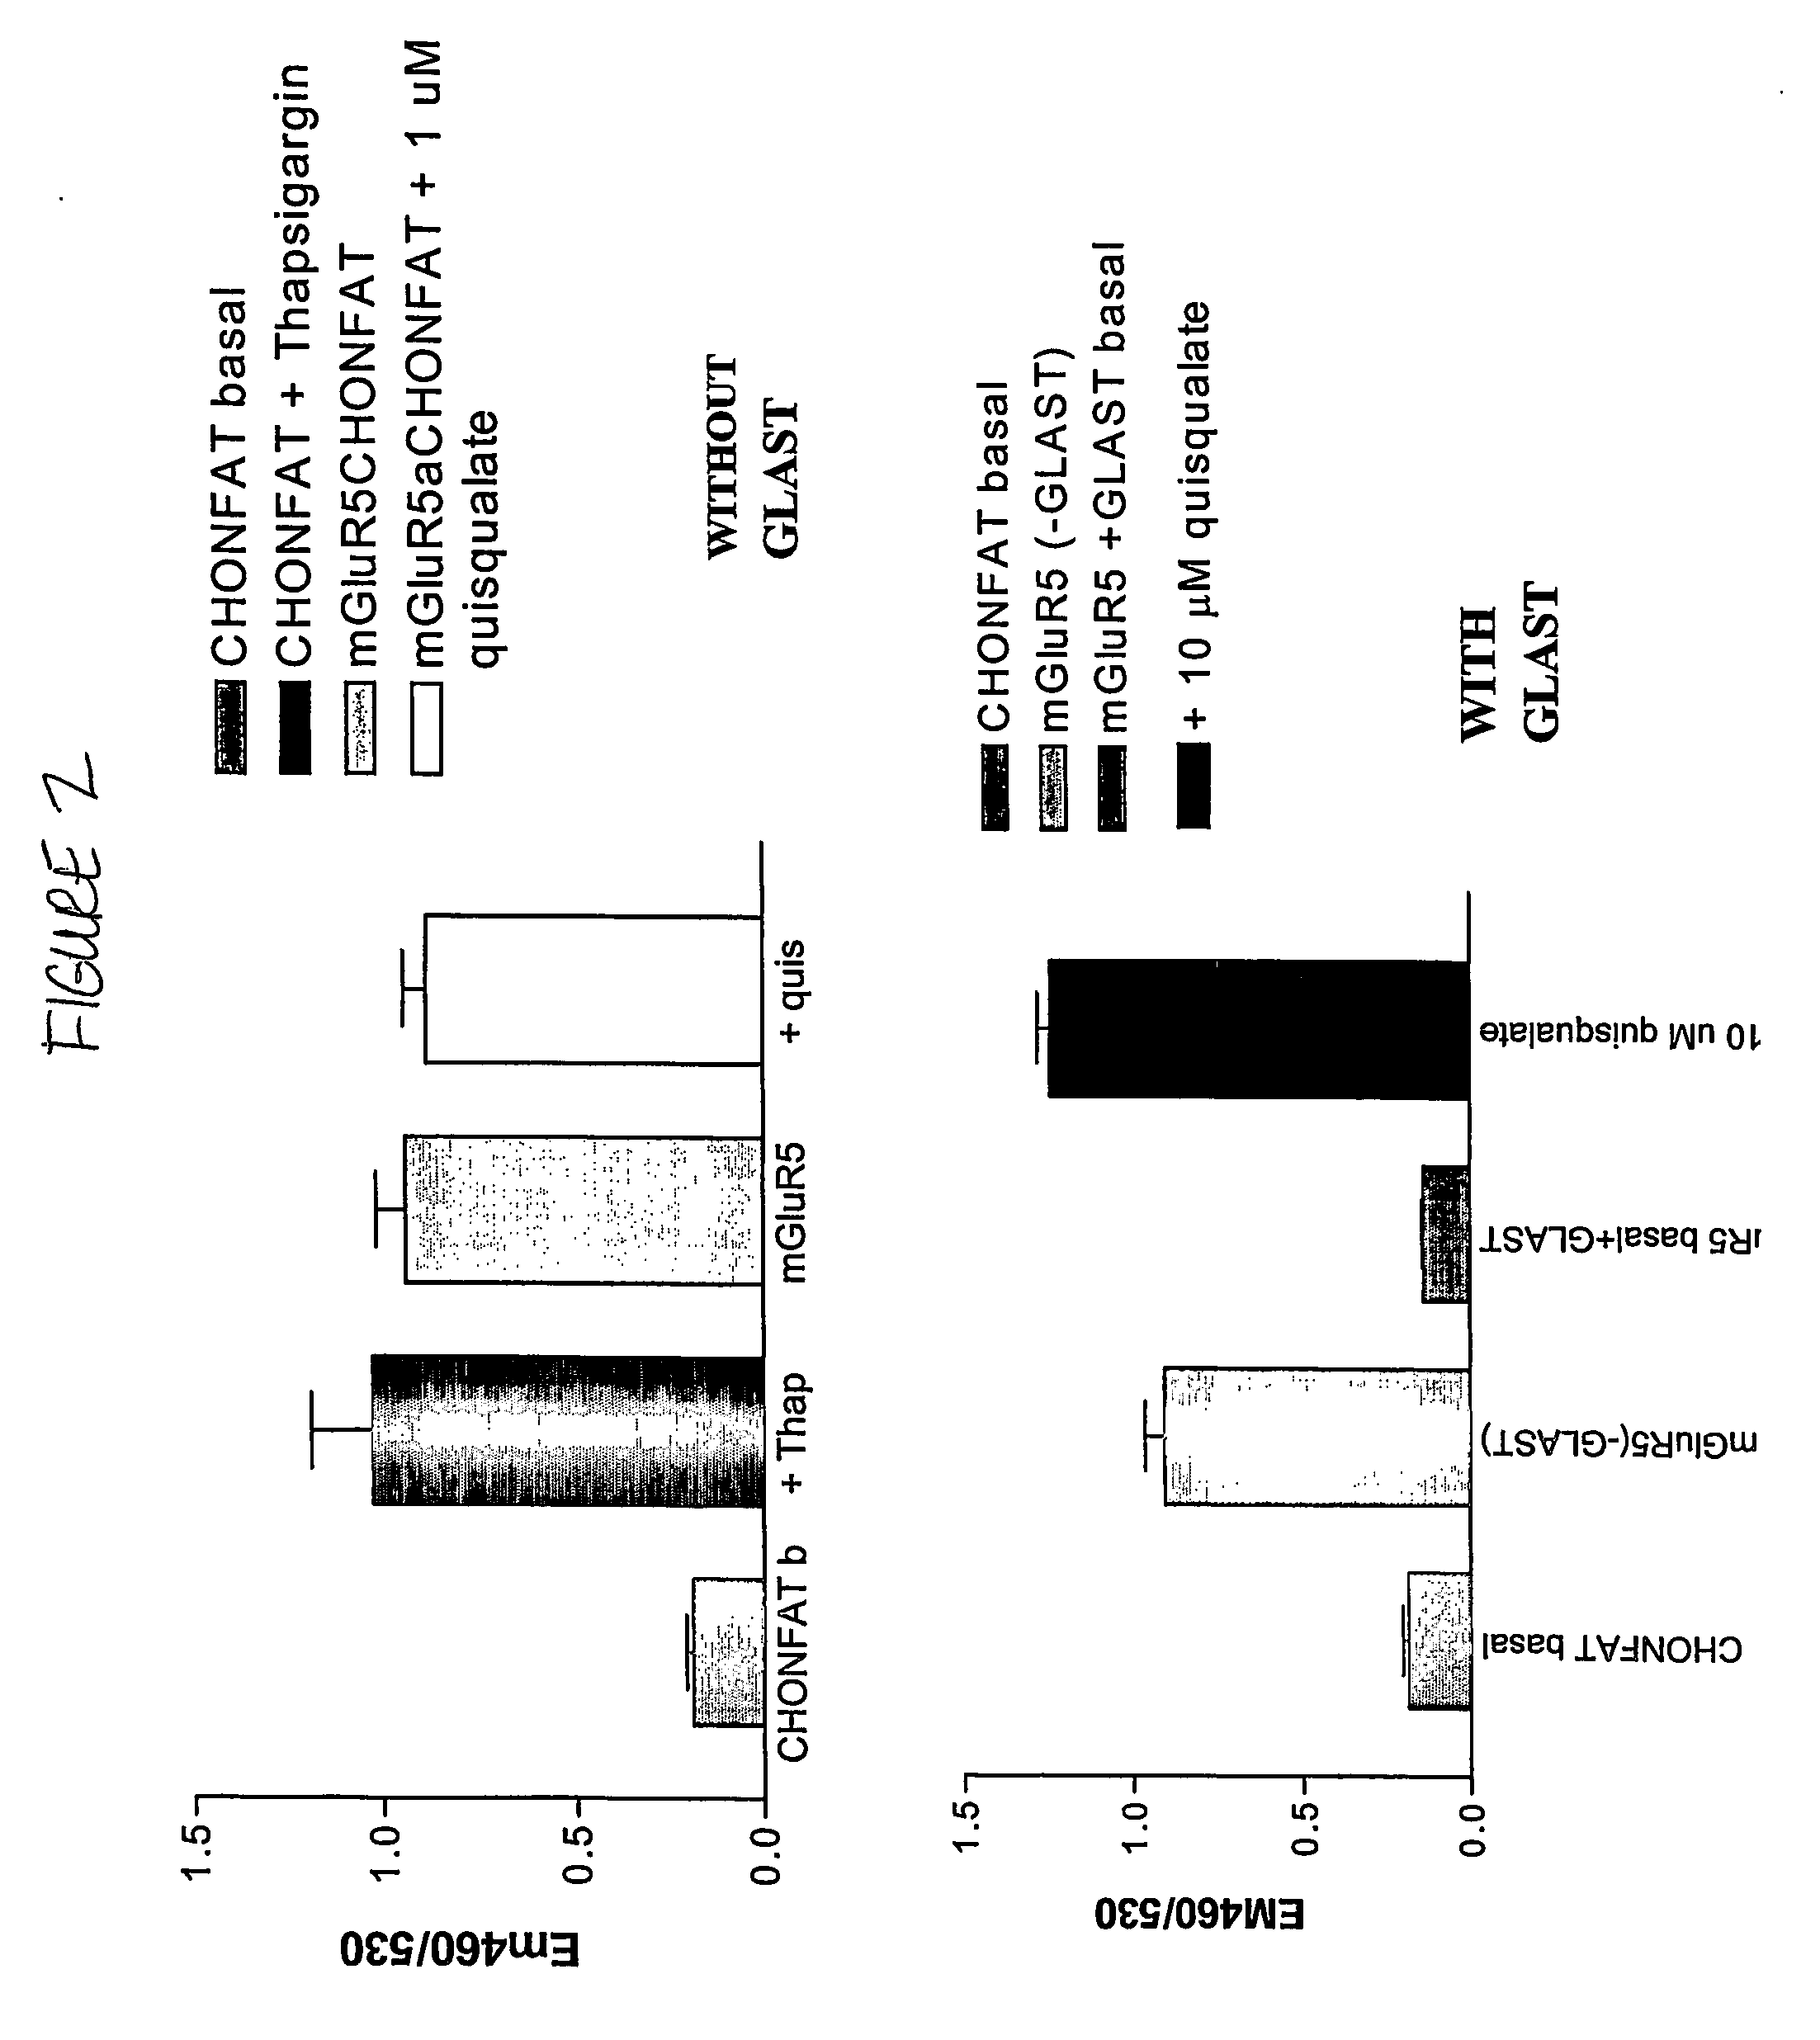 Methods for identifying cell surface receptor protein modulators